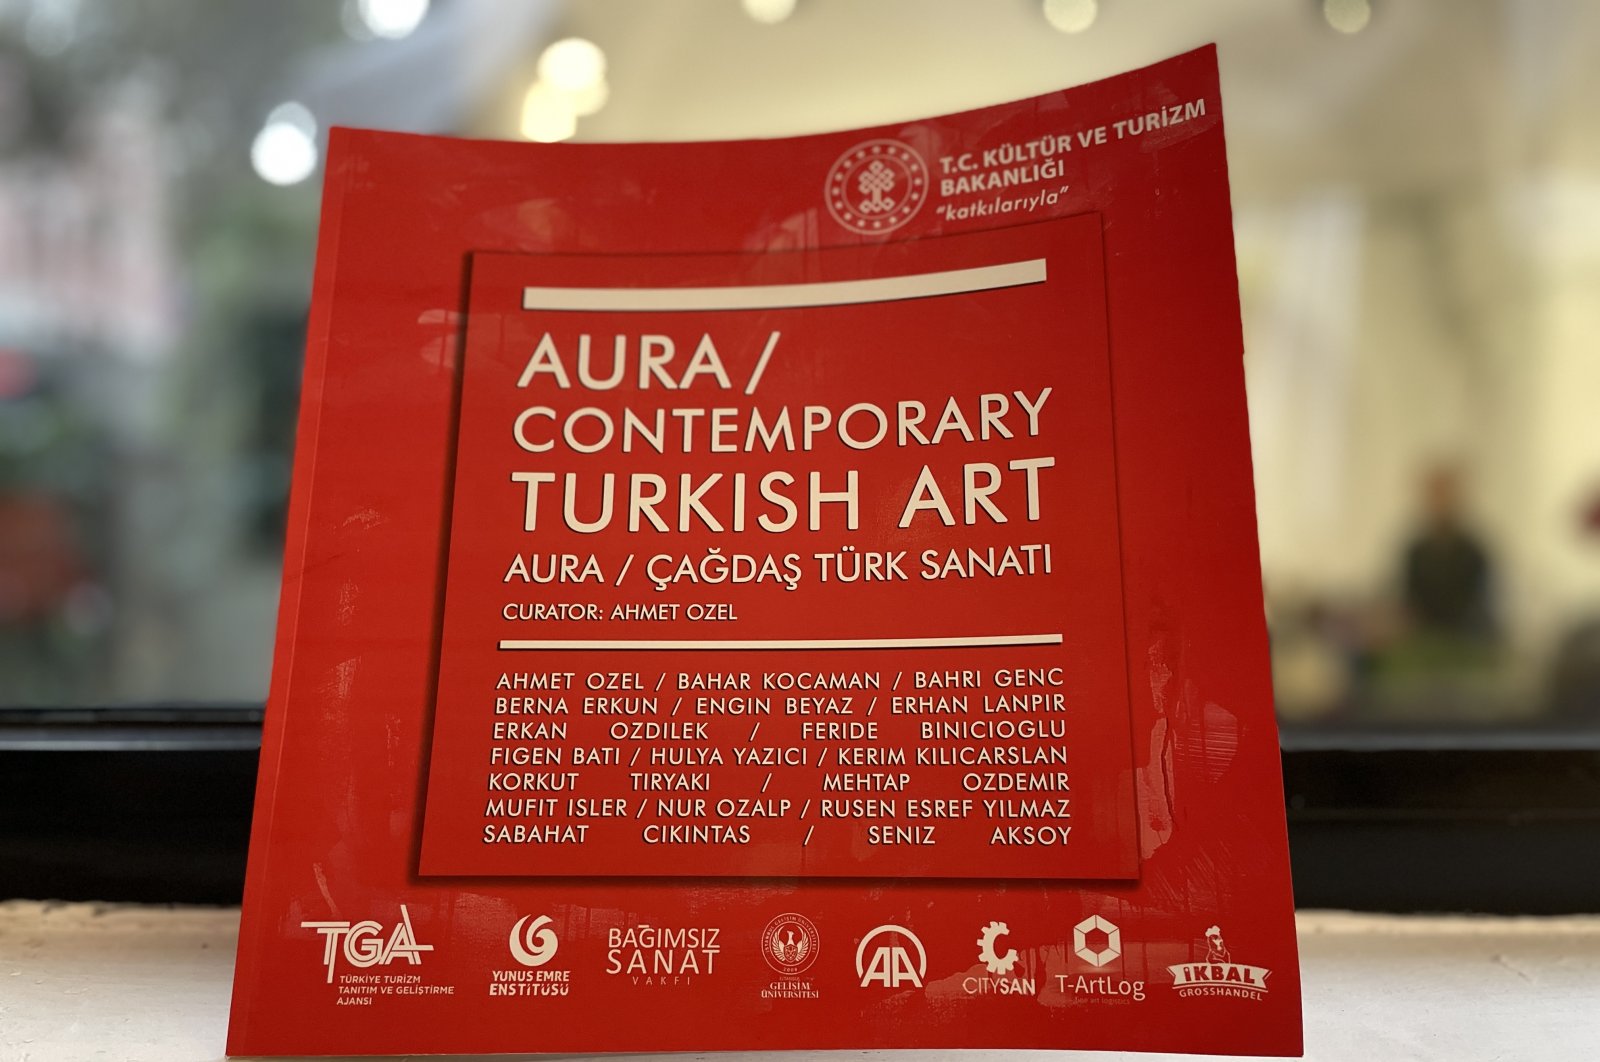 &quot;Aura-Turkish Contemporary Art Exhibition&quot; by the Independent Art Foundation will be held at Pulchri Studio Art Center in The Hague, Netherlands. (AA Photo)